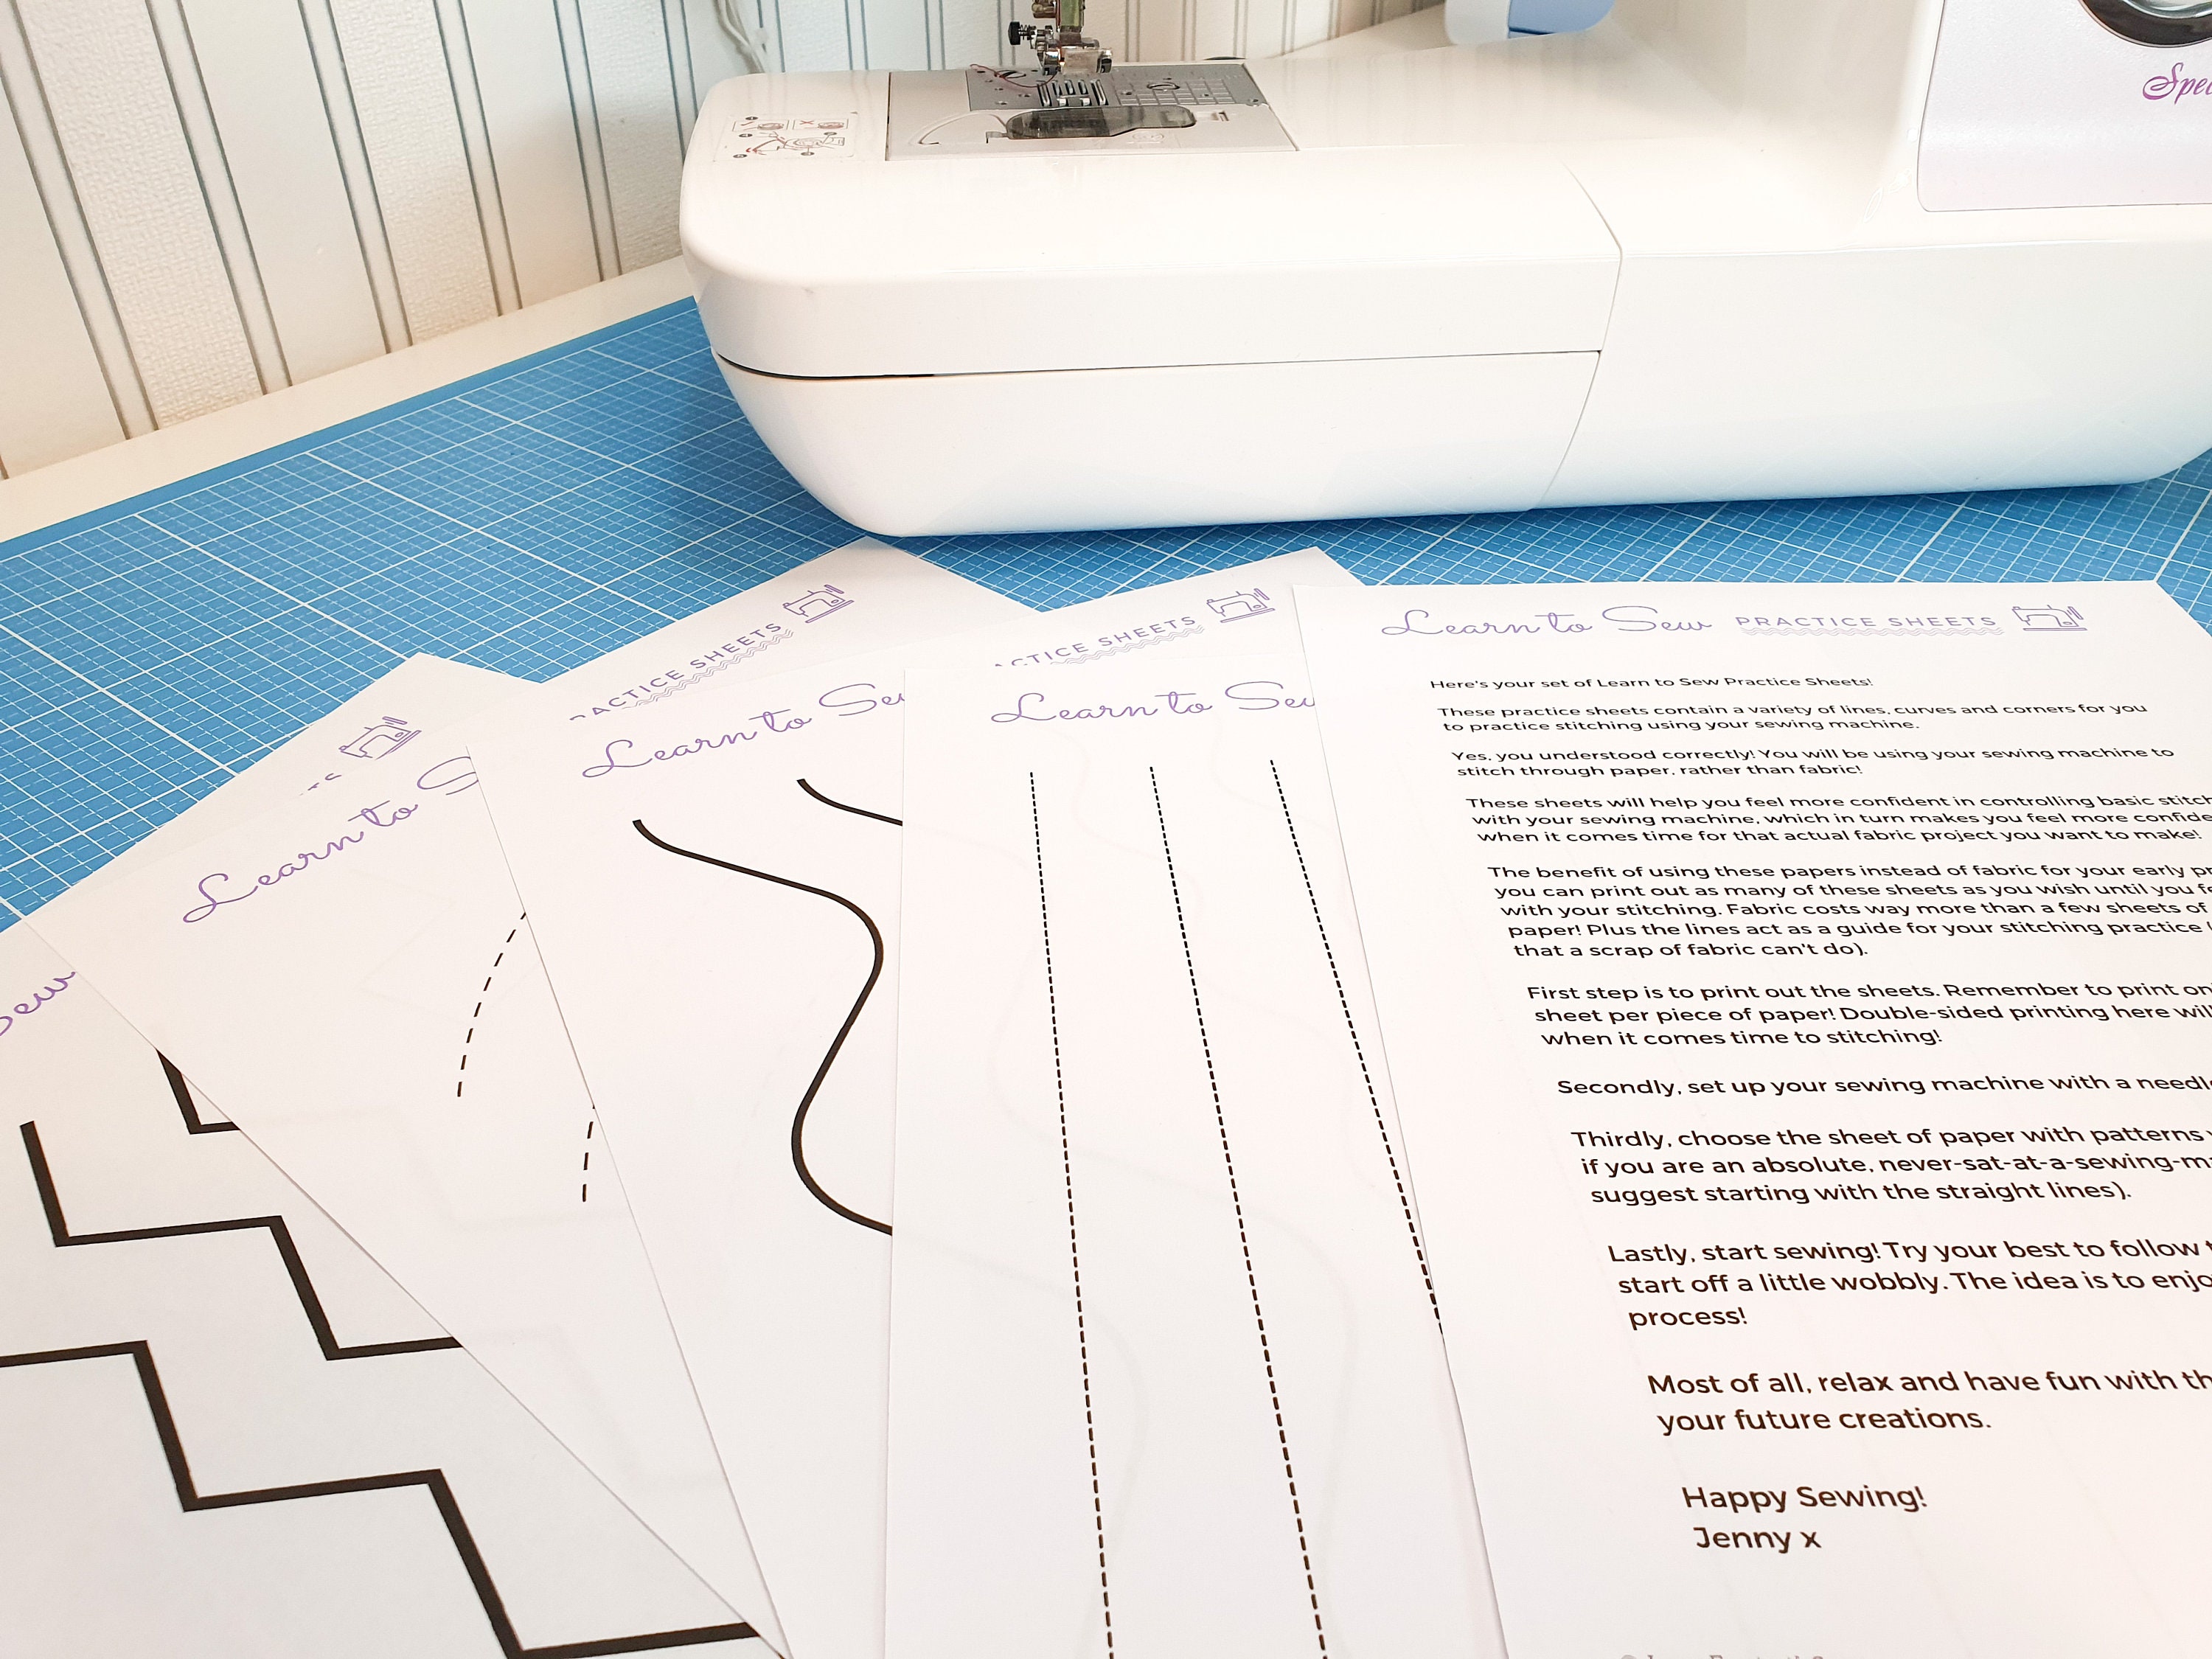 Learn to Sew Practice Sheets Printable Sewing Practice Worksheets Practice  Stitching on Paper PDF Download Beginners Sewing Templates 